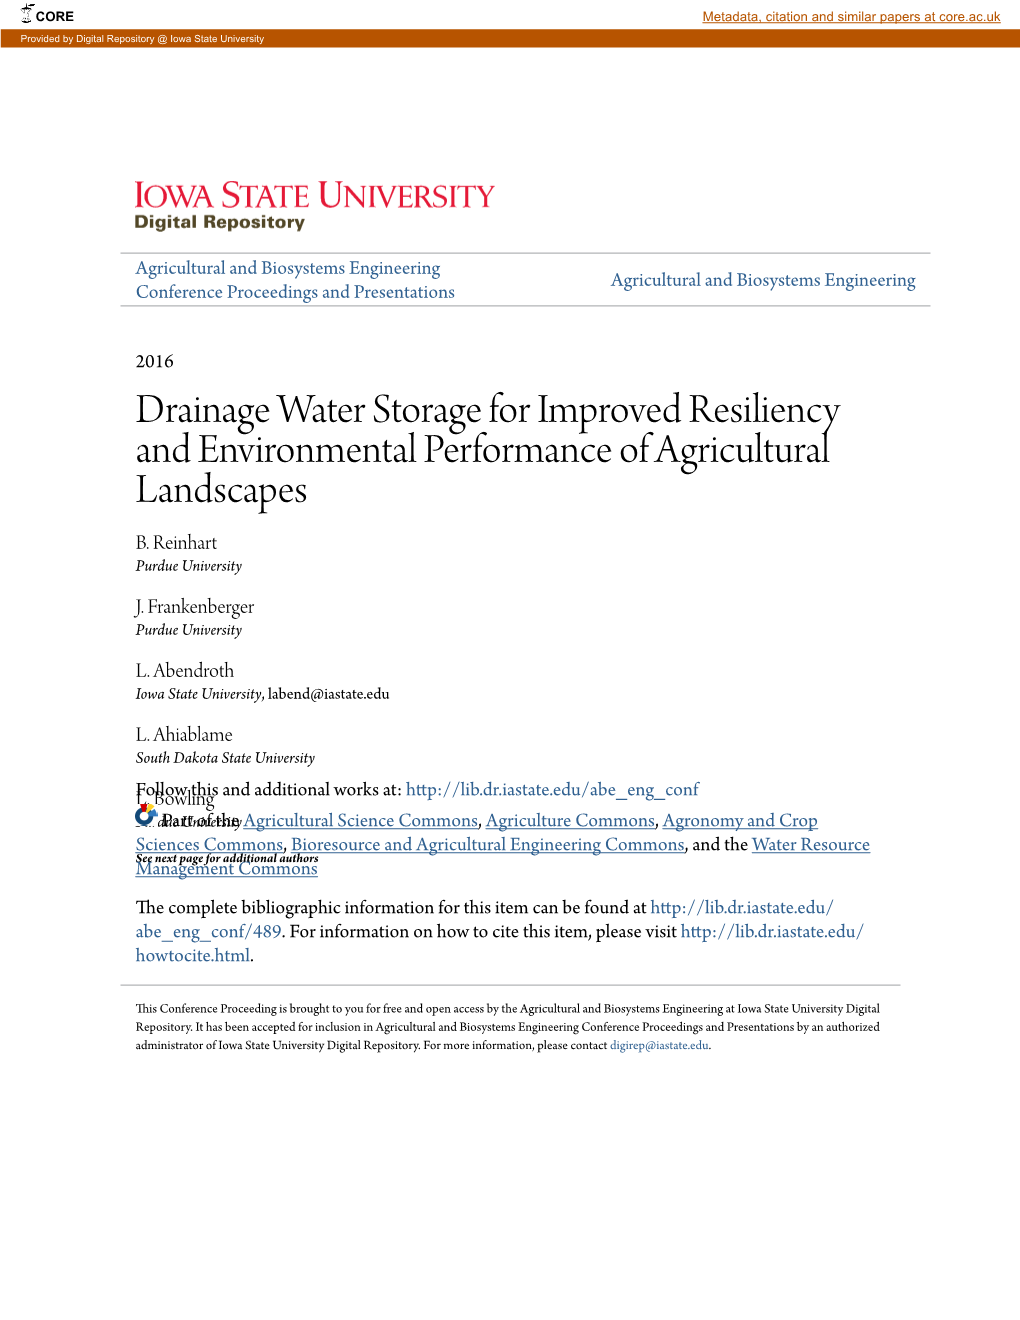 Drainage Water Storage for Improved Resiliency and Environmental Performance of Agricultural Landscapes B